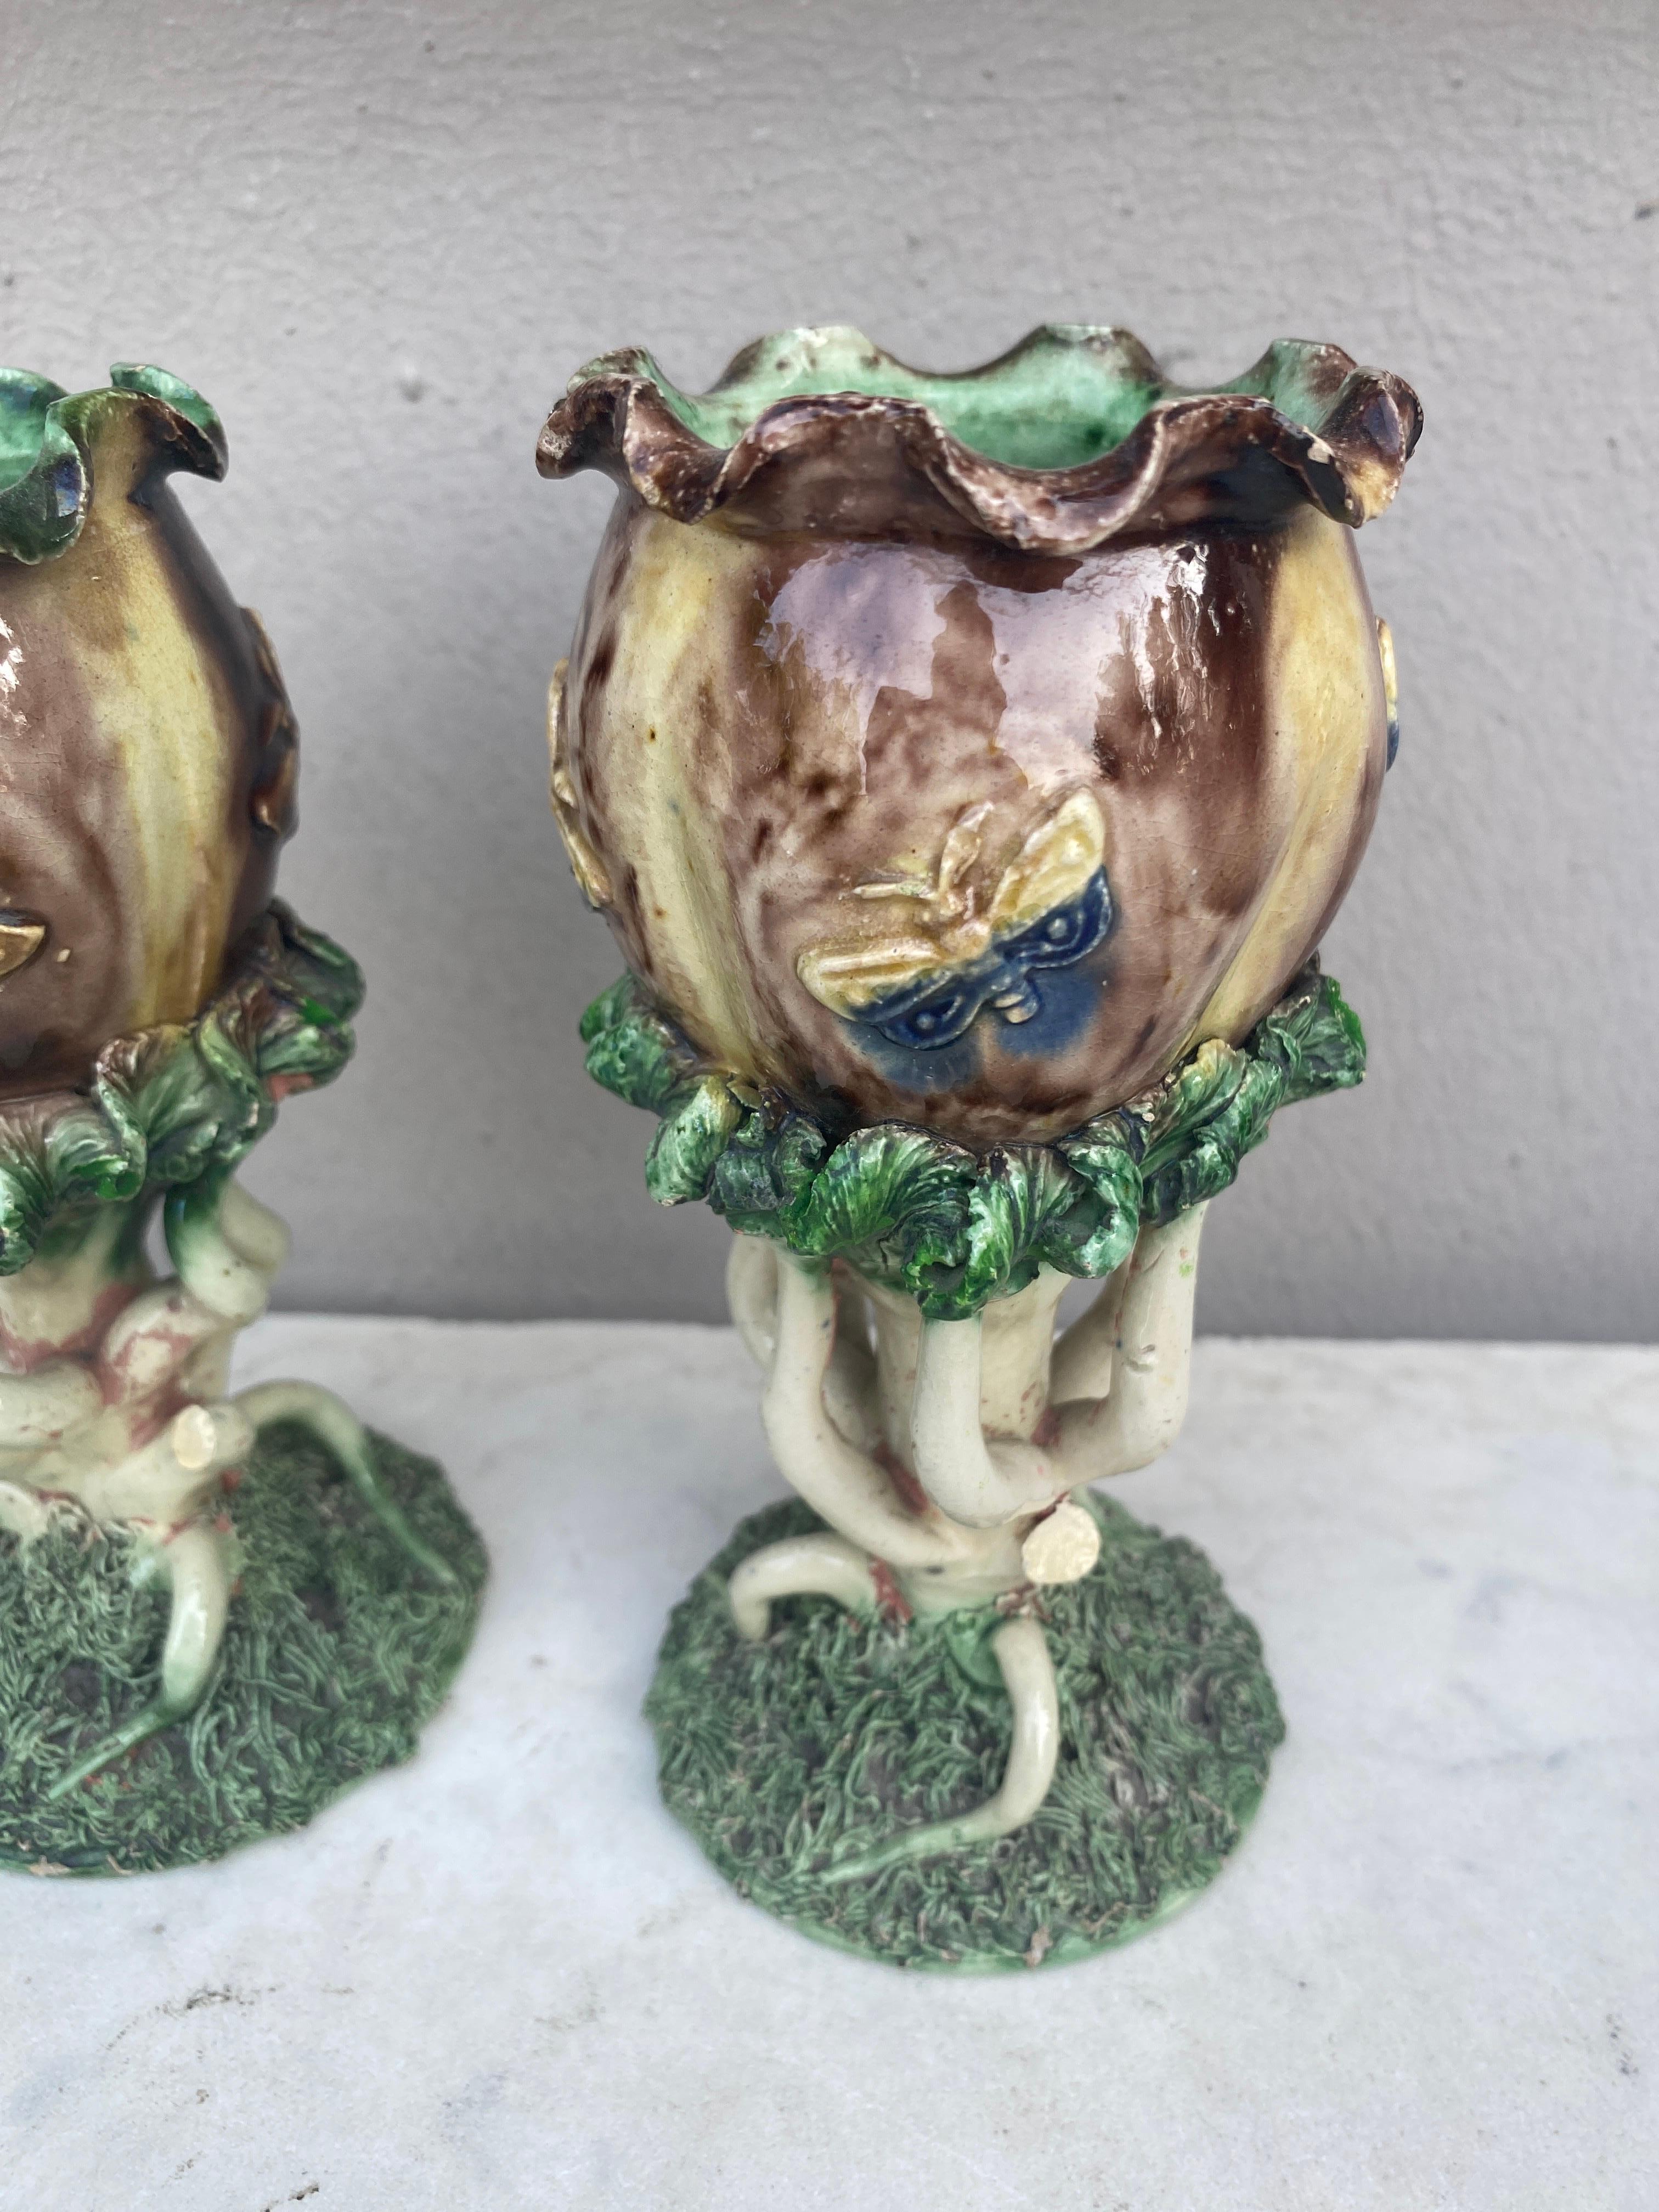 Pair of 19th century Palissy chalices vases with butterflies signed Thomas Sergent, the feets are stylized seaweeds in a Renaissance style.
School of Paris.
The School of Paris was composed by makers as Victor Barbizet, Francois Maurice, Thomas